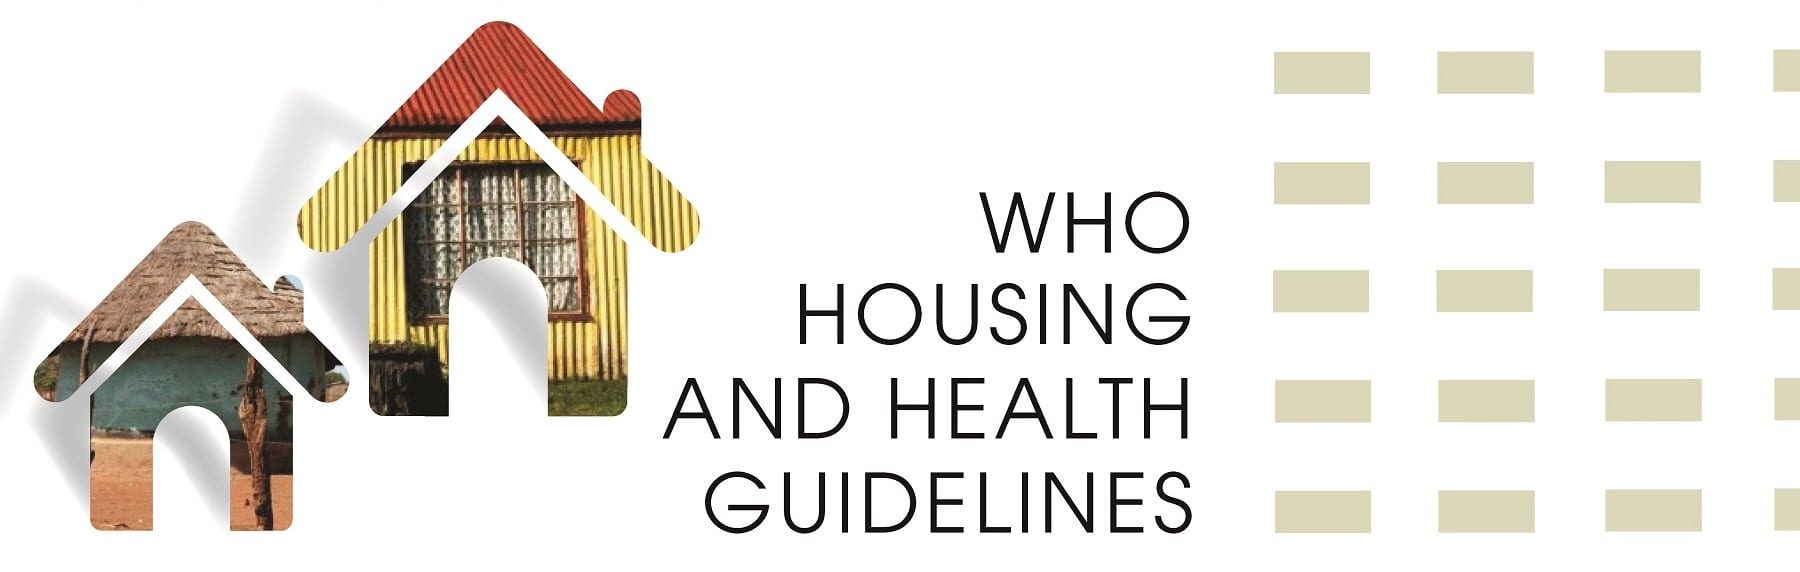 World Health Organization Releases Seminal Housing and Health Guidelines